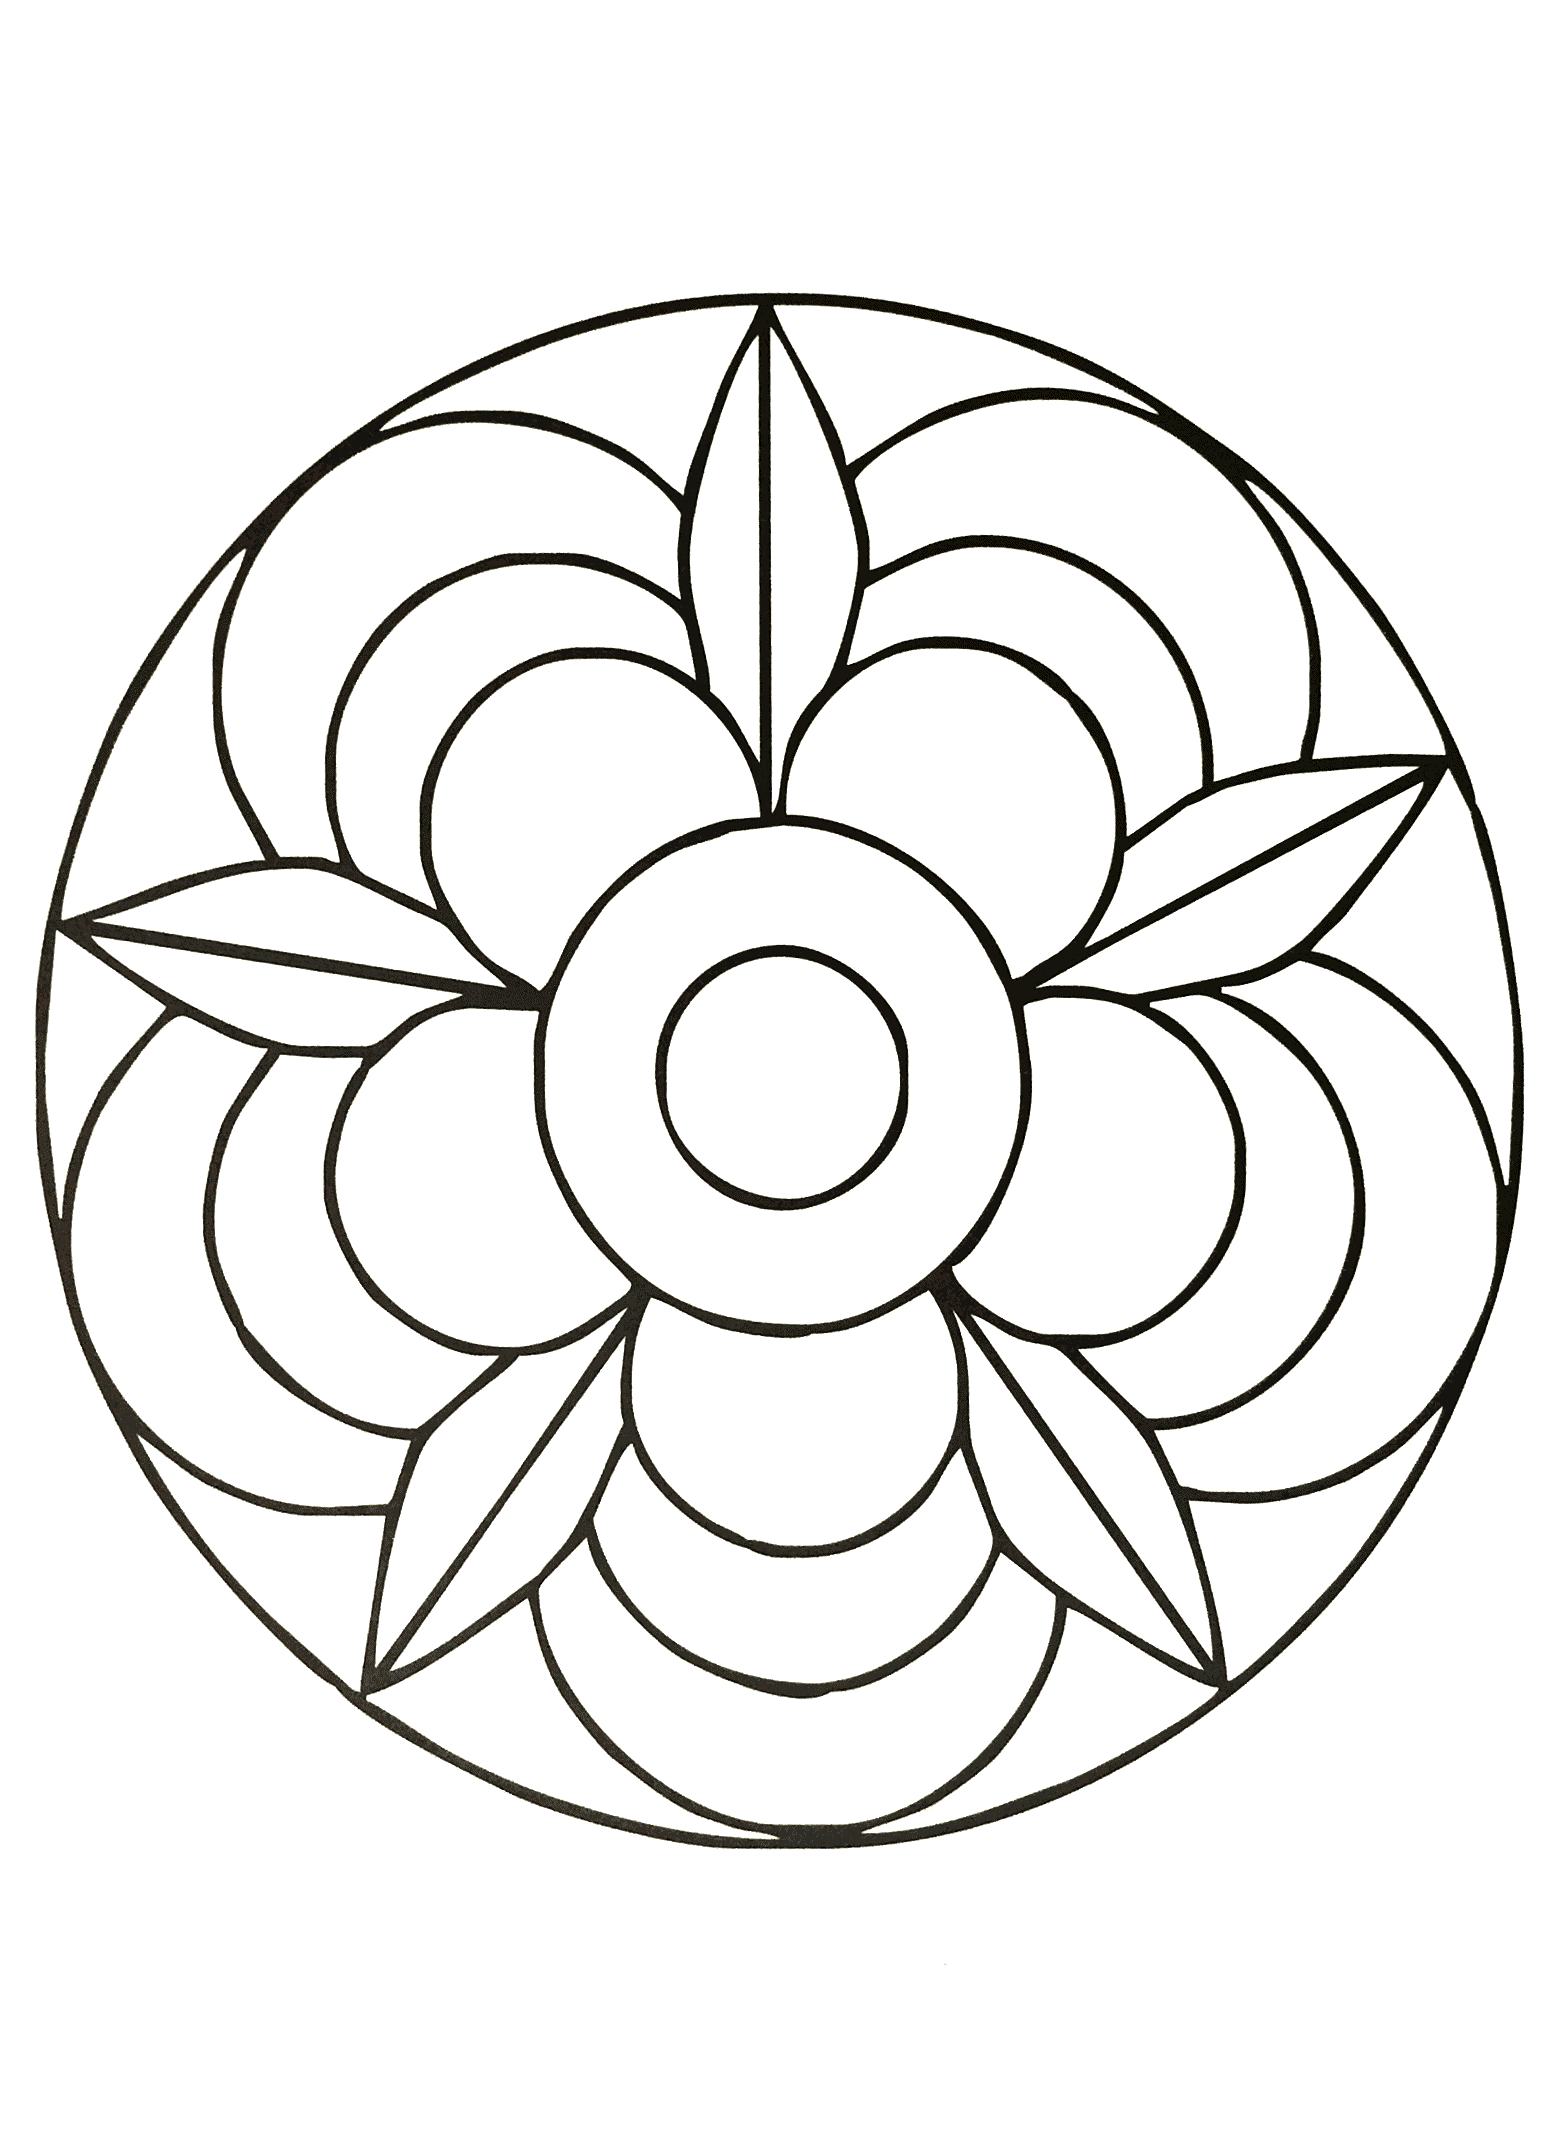 Easy Cute Mandala Coloring Pages